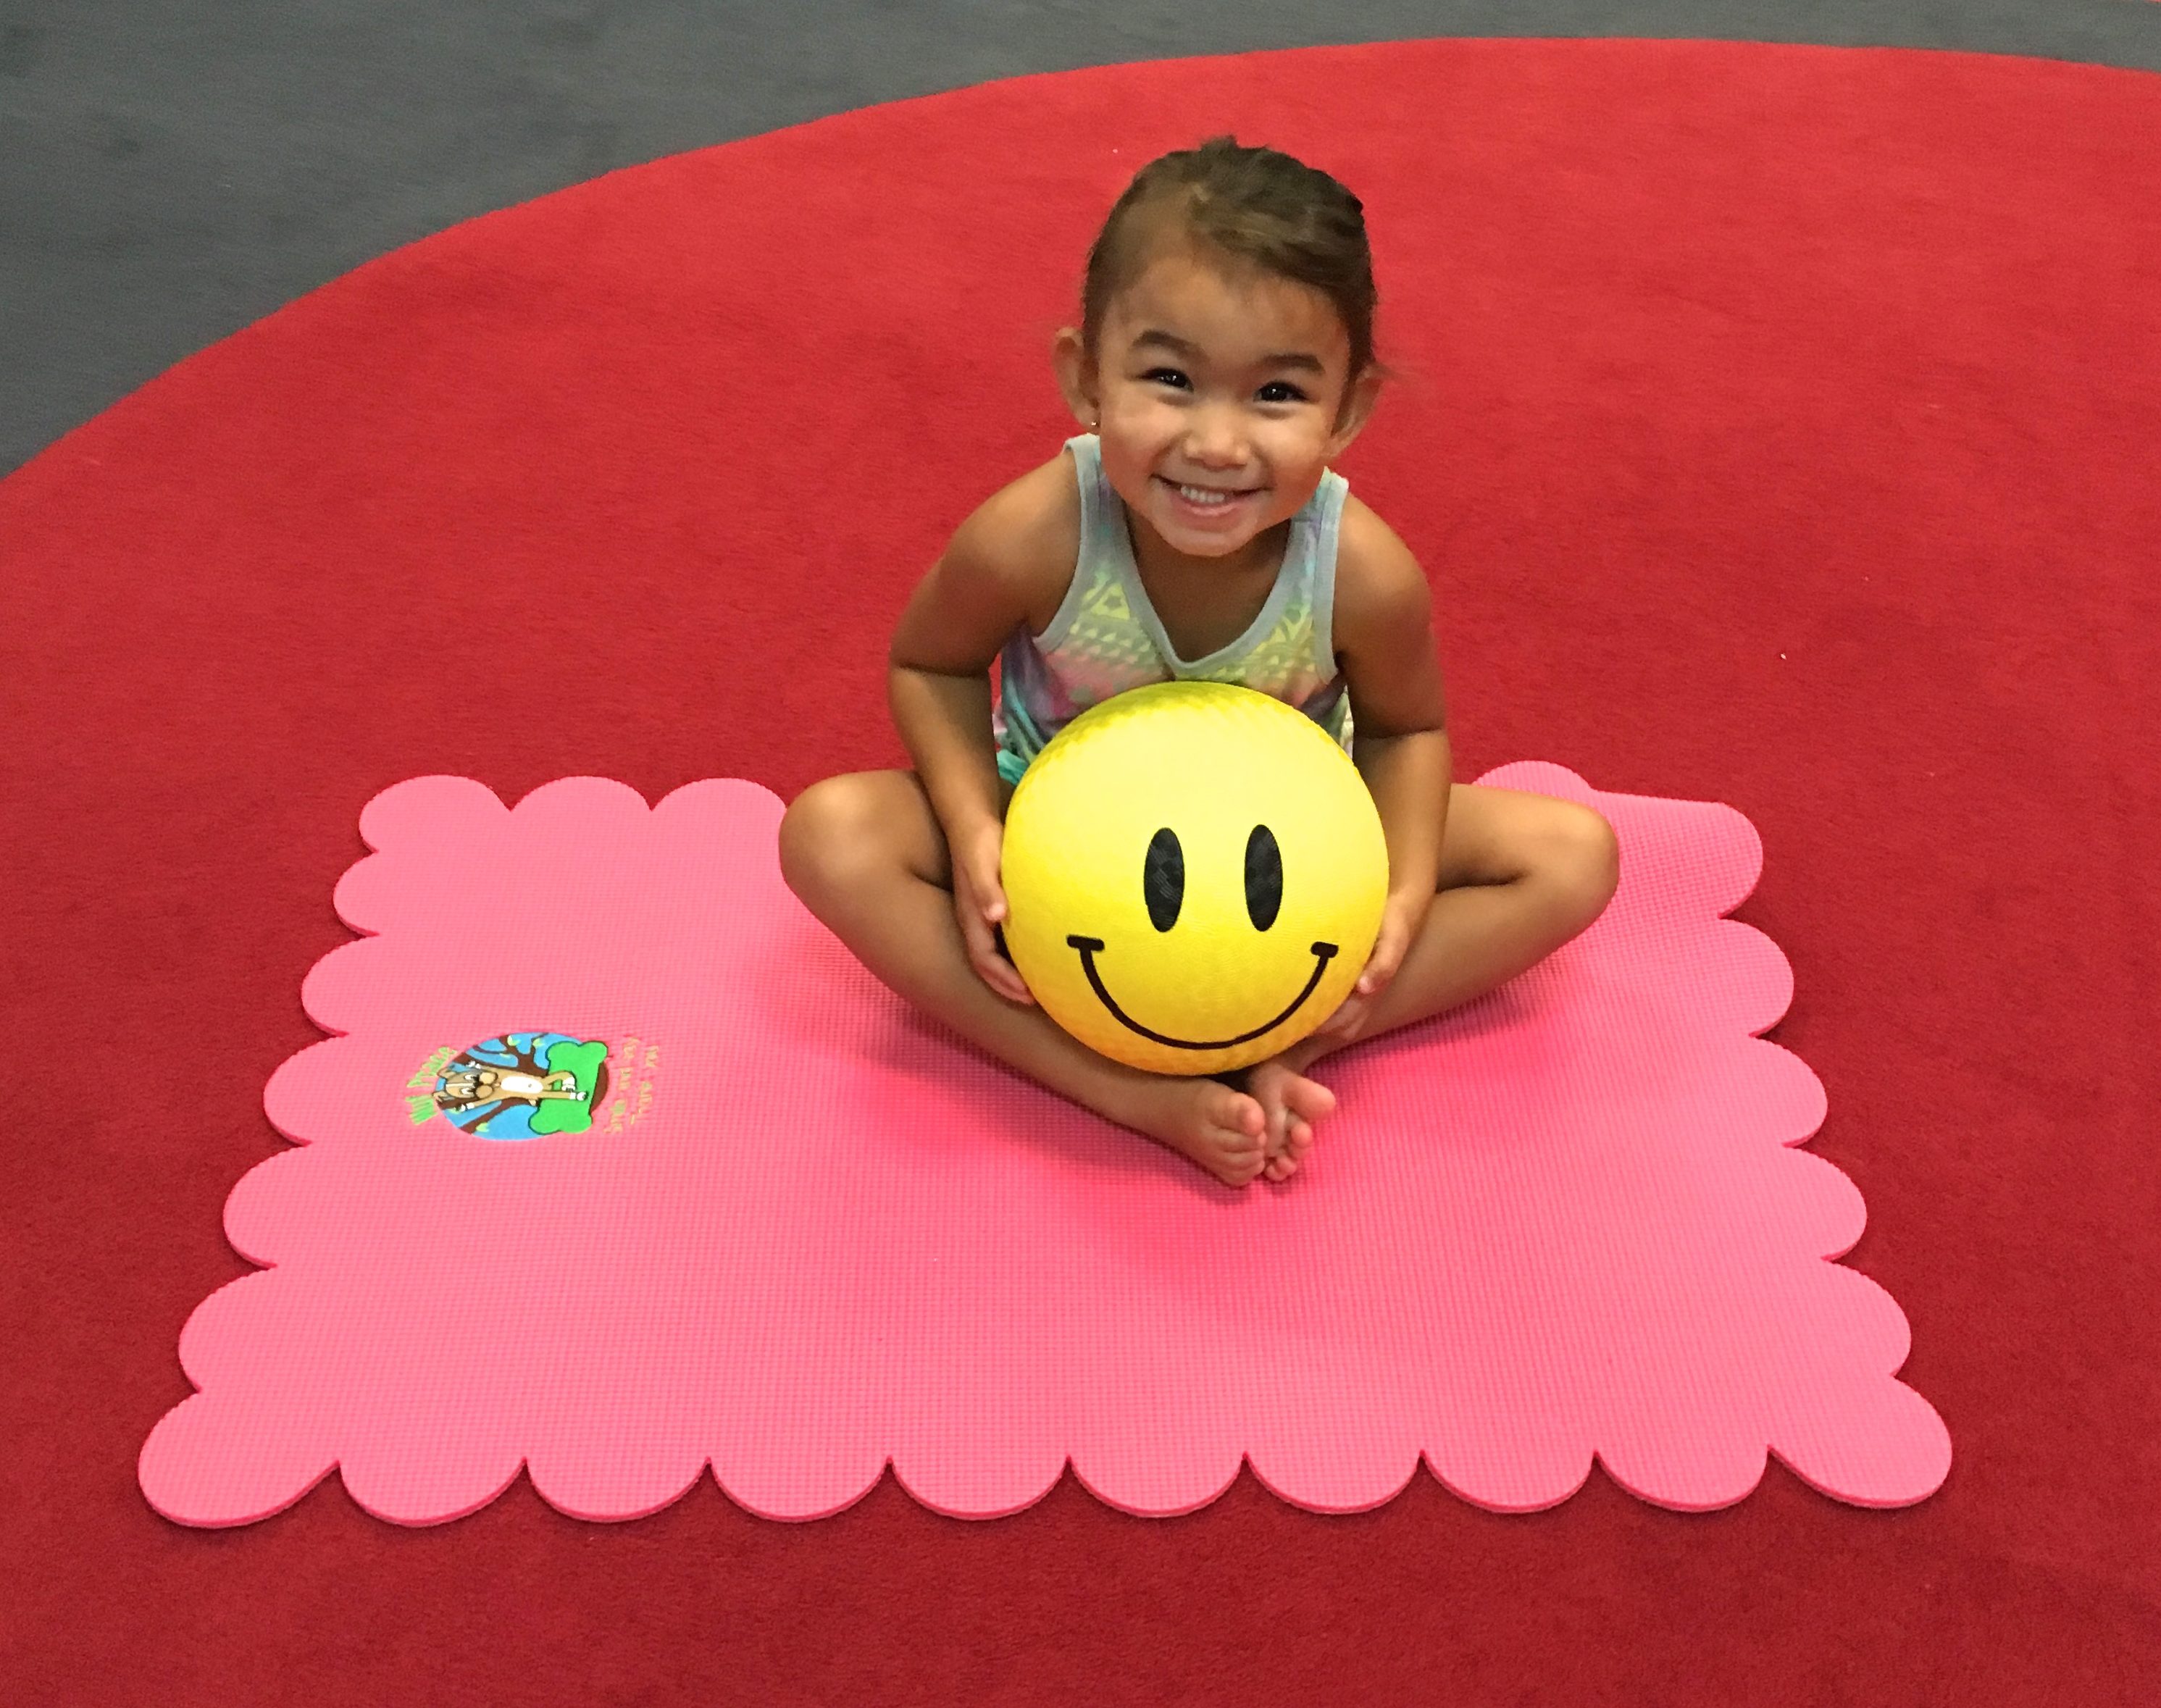 Peace Yoga Mats for Kids - Wuf Shanti products